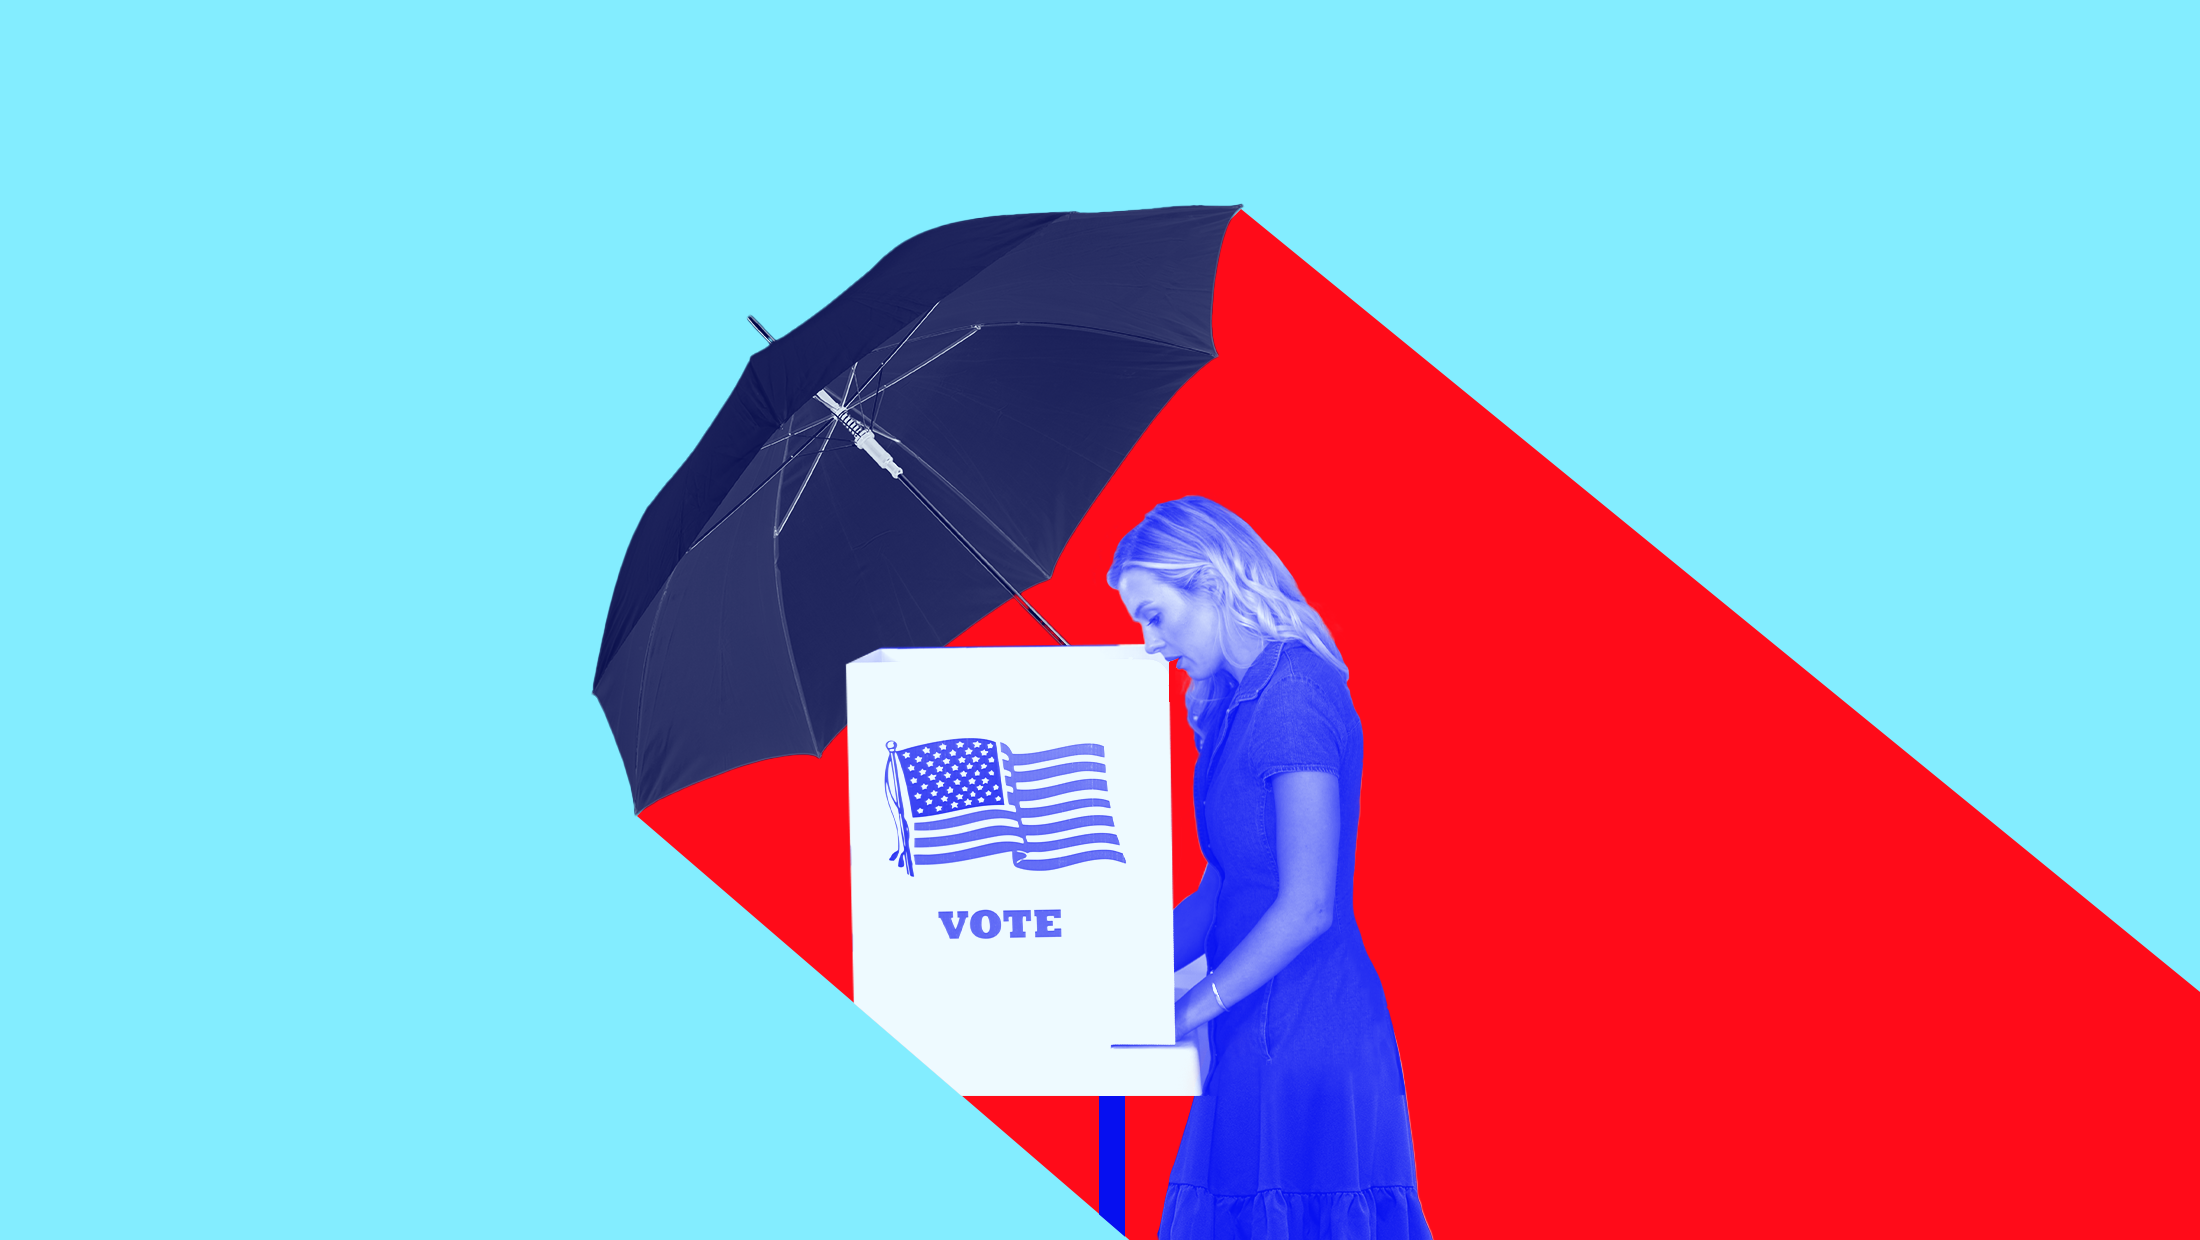 Blue background with blue-toned person standing at a voting booth with an umbrella over their head in front of a red slanted block.